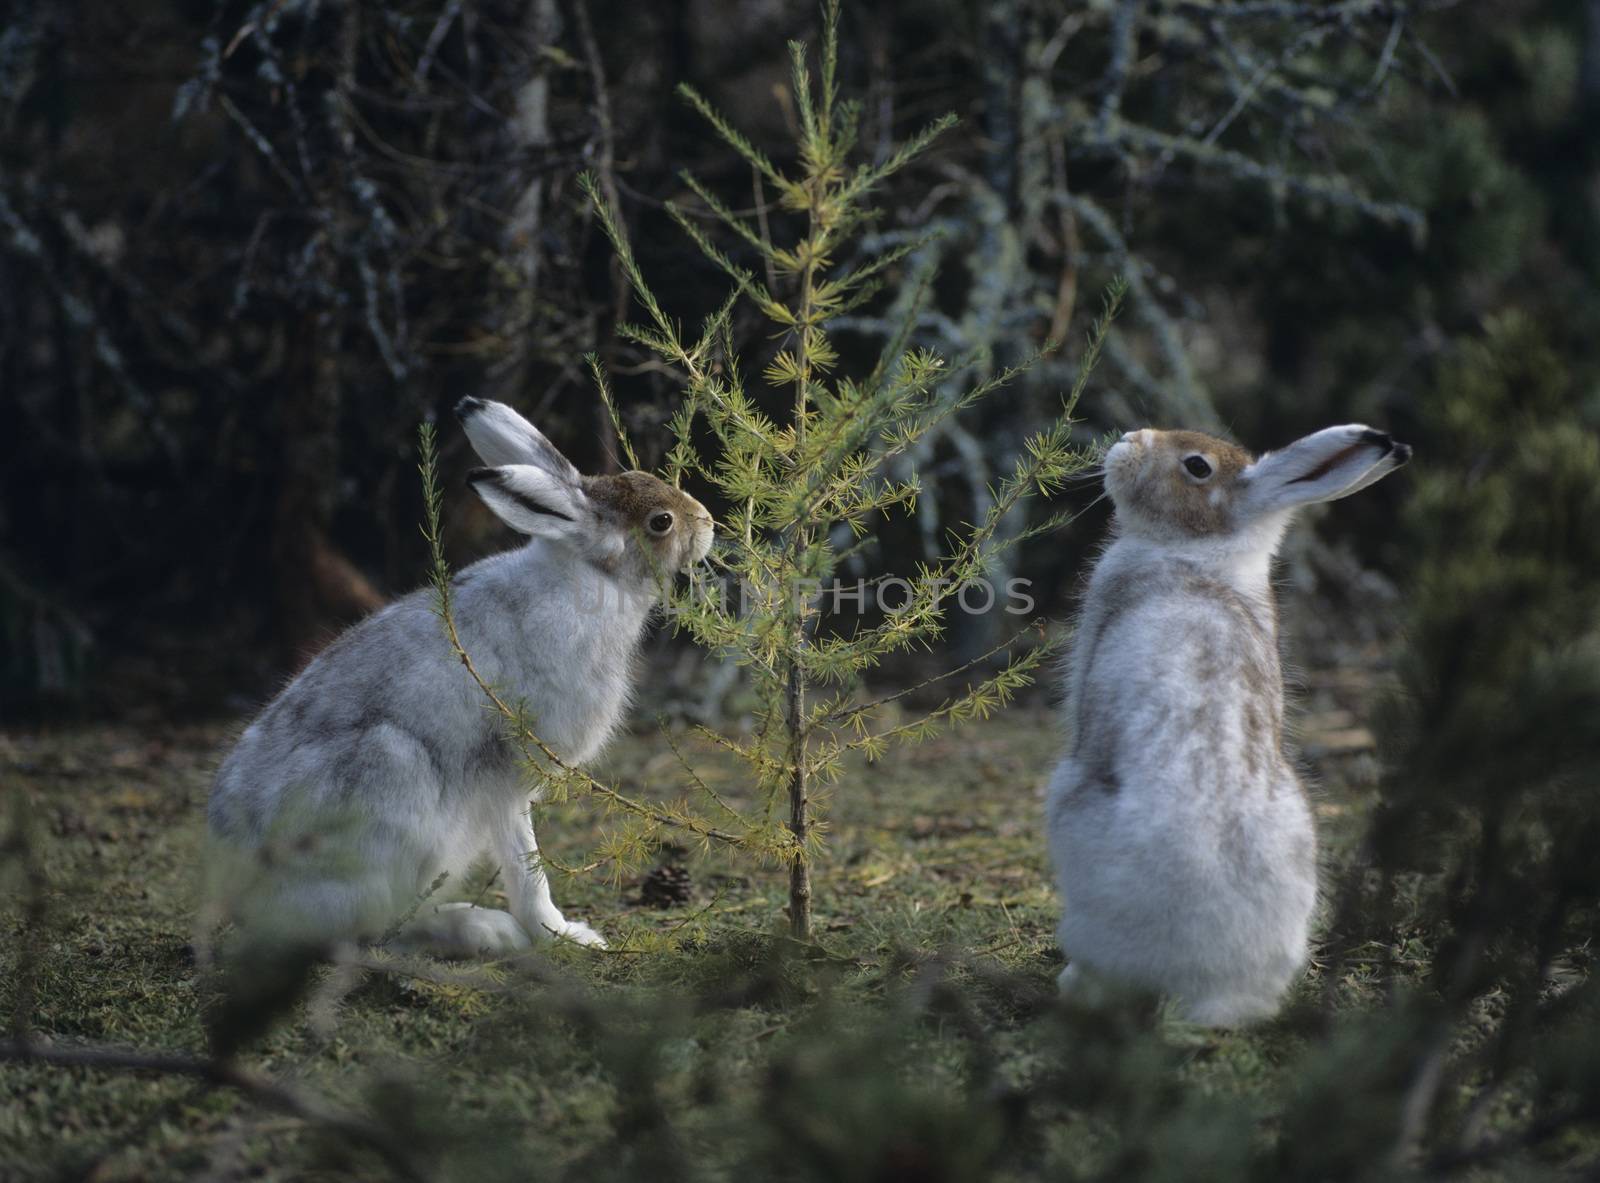 Two Hares Nibbling on Small Tree by Jaanaaa